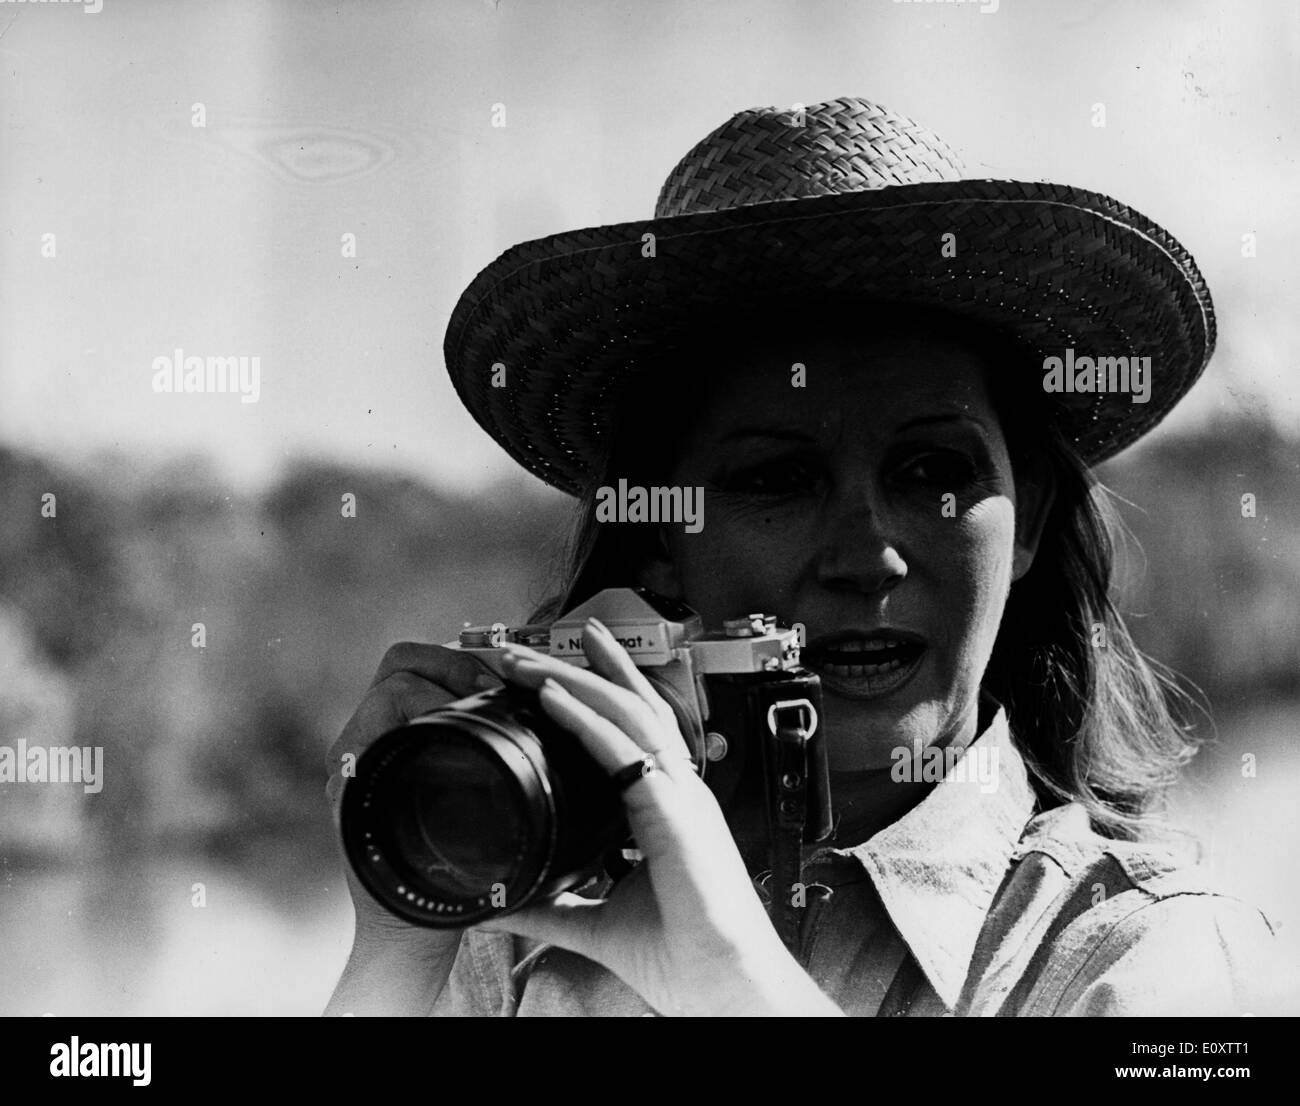 Actor Roger Moore's wife Luisa Moore taking pictures Stock Photo